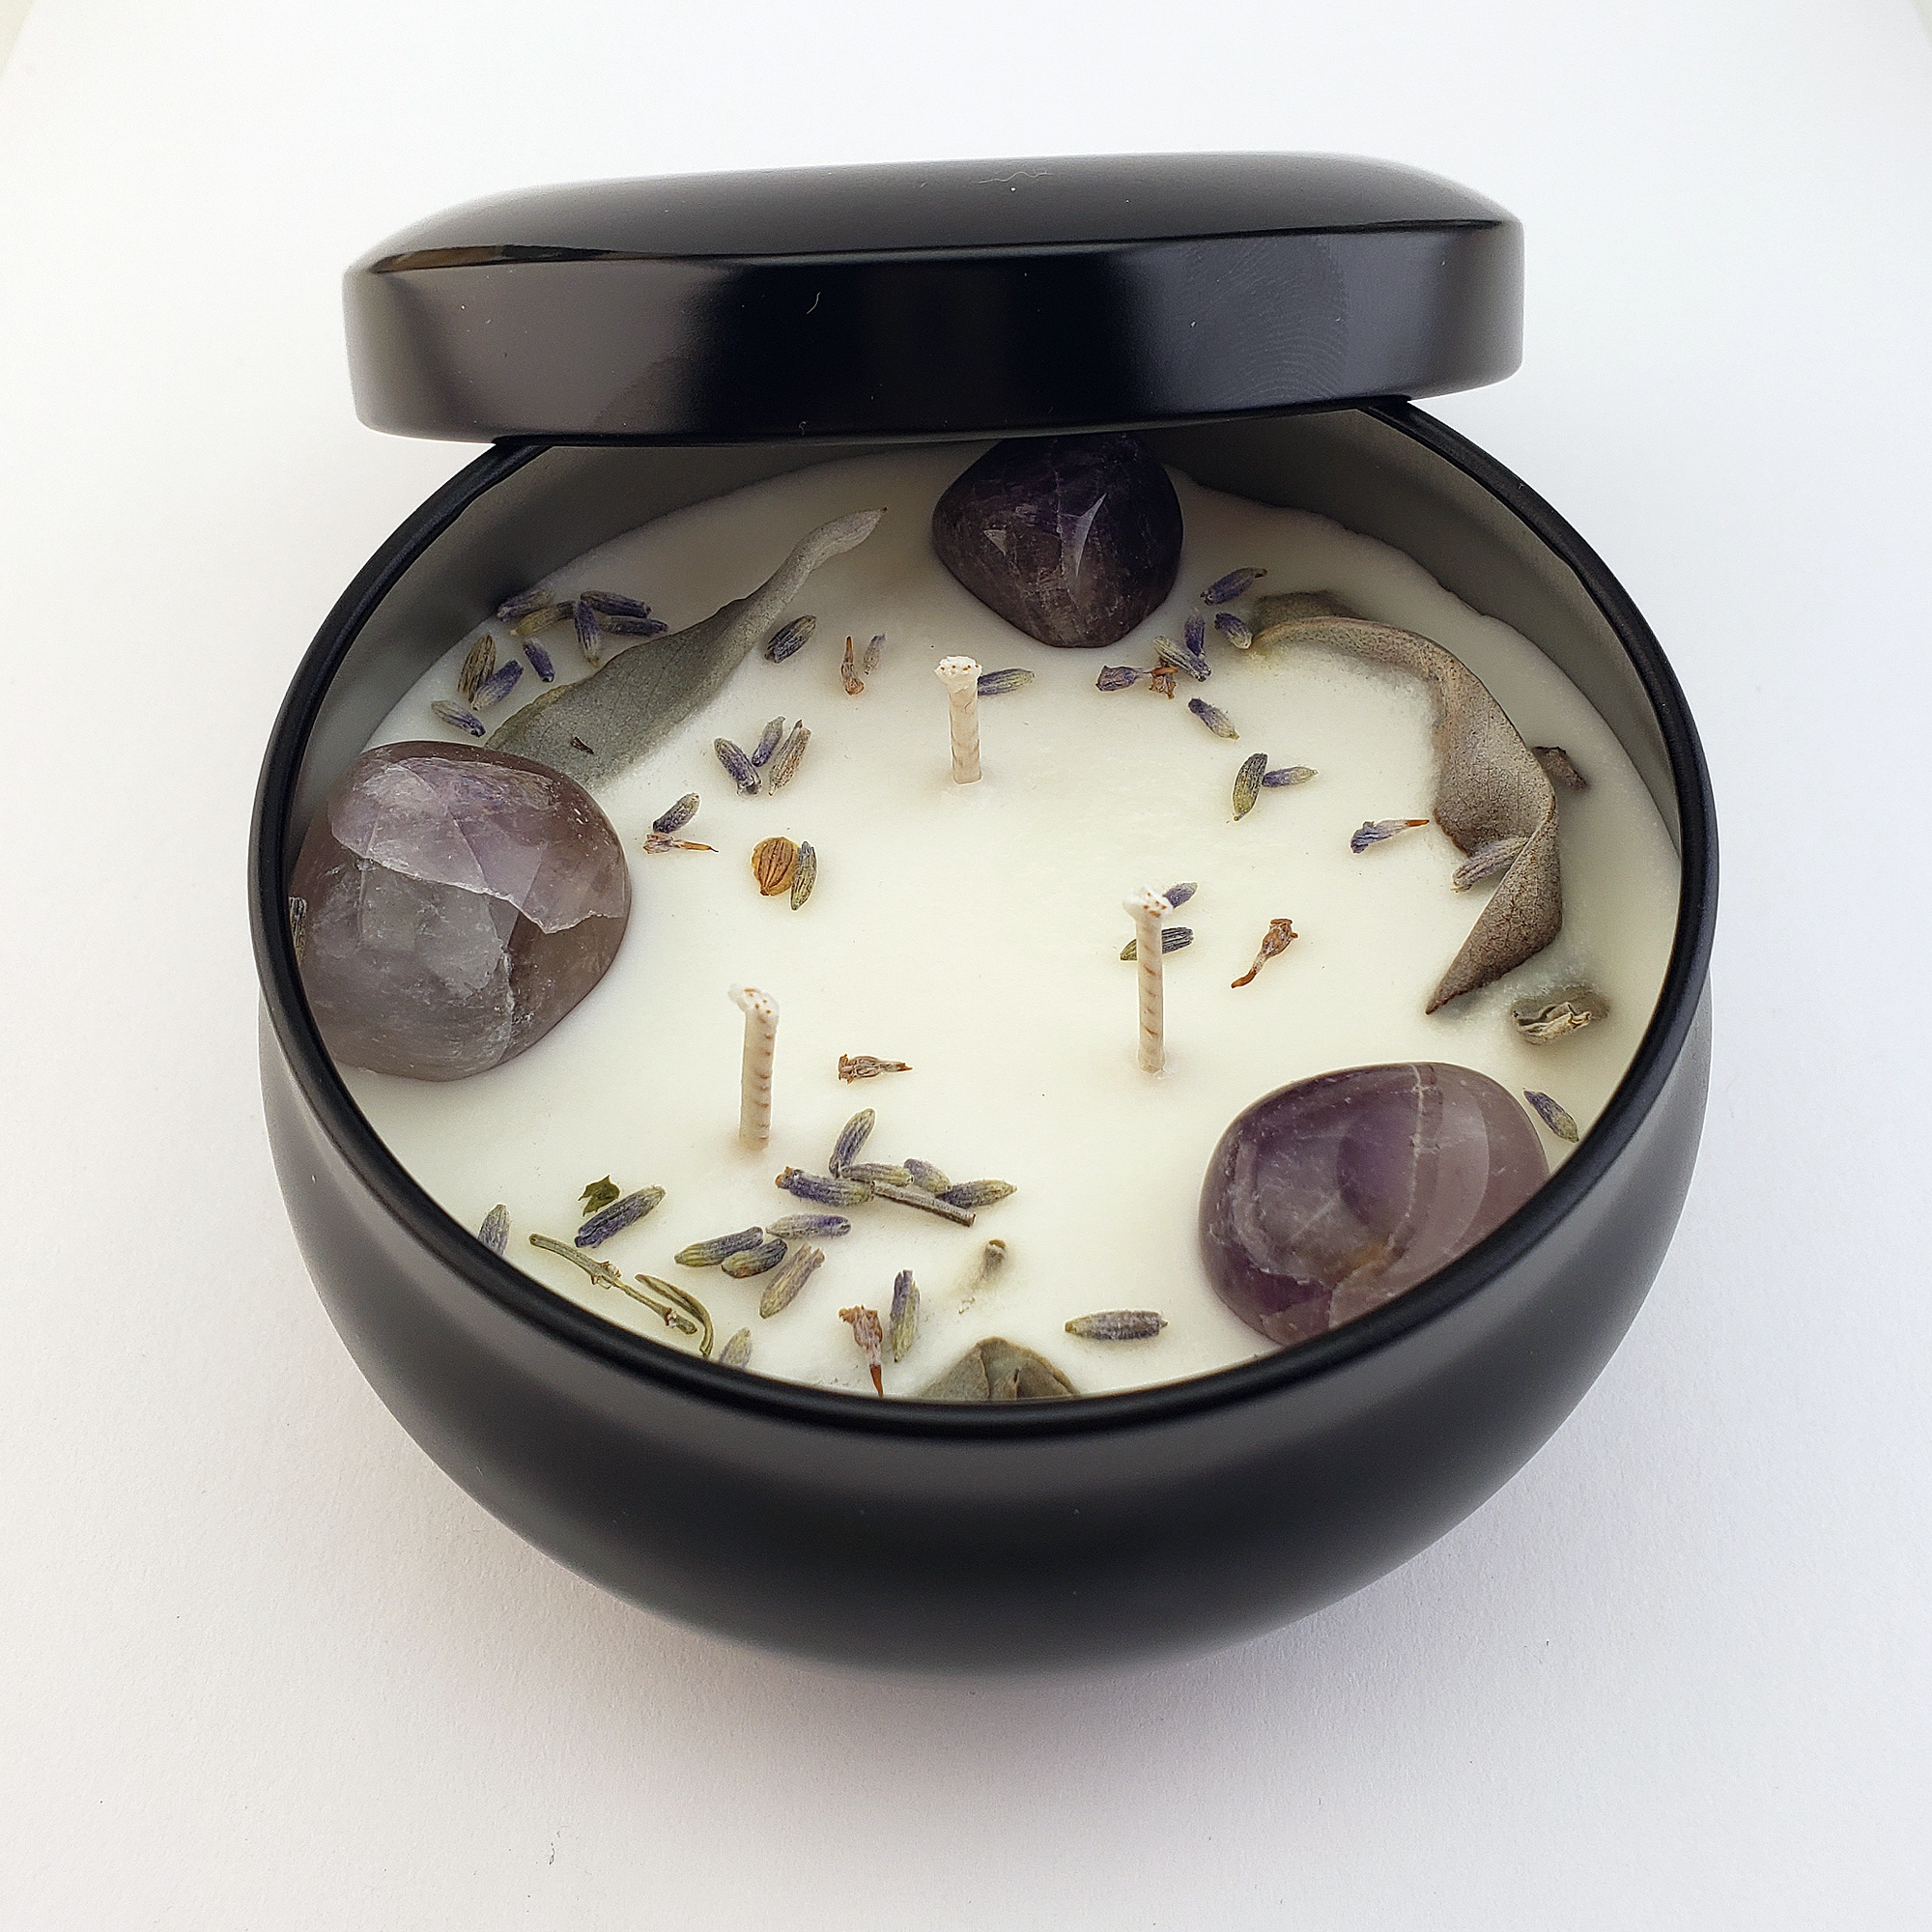 Calming Lavender - 6oz Handmade Coconut Soy Wax Scented Candle in Tin with Lid - Close Up